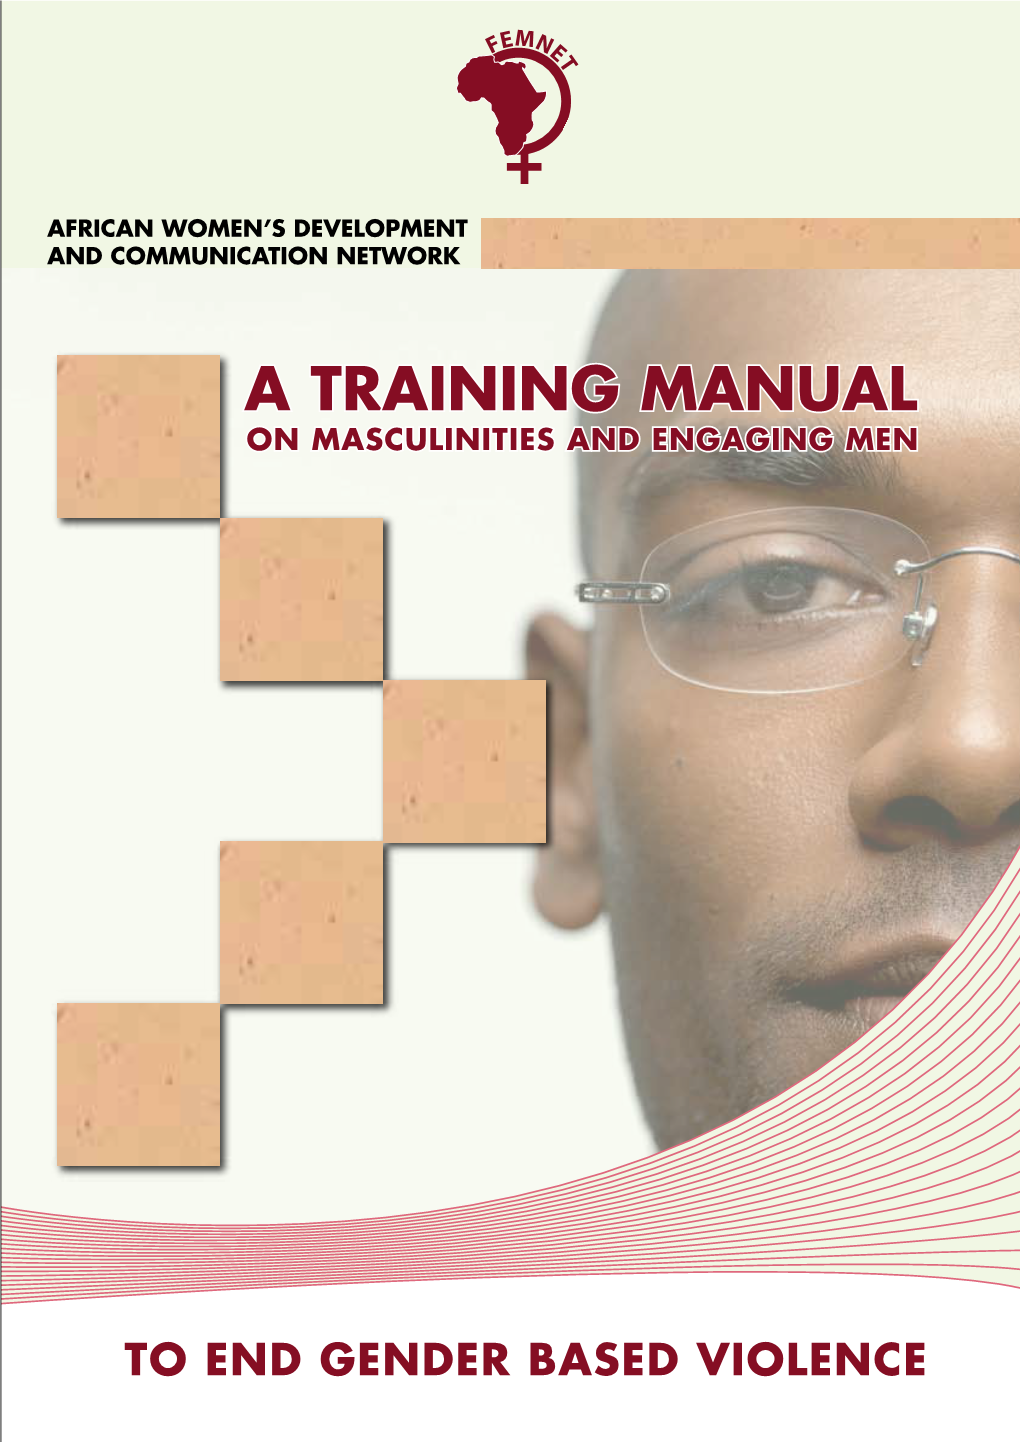 A Training Manual on Masculinities and Engaging Men to End Gender